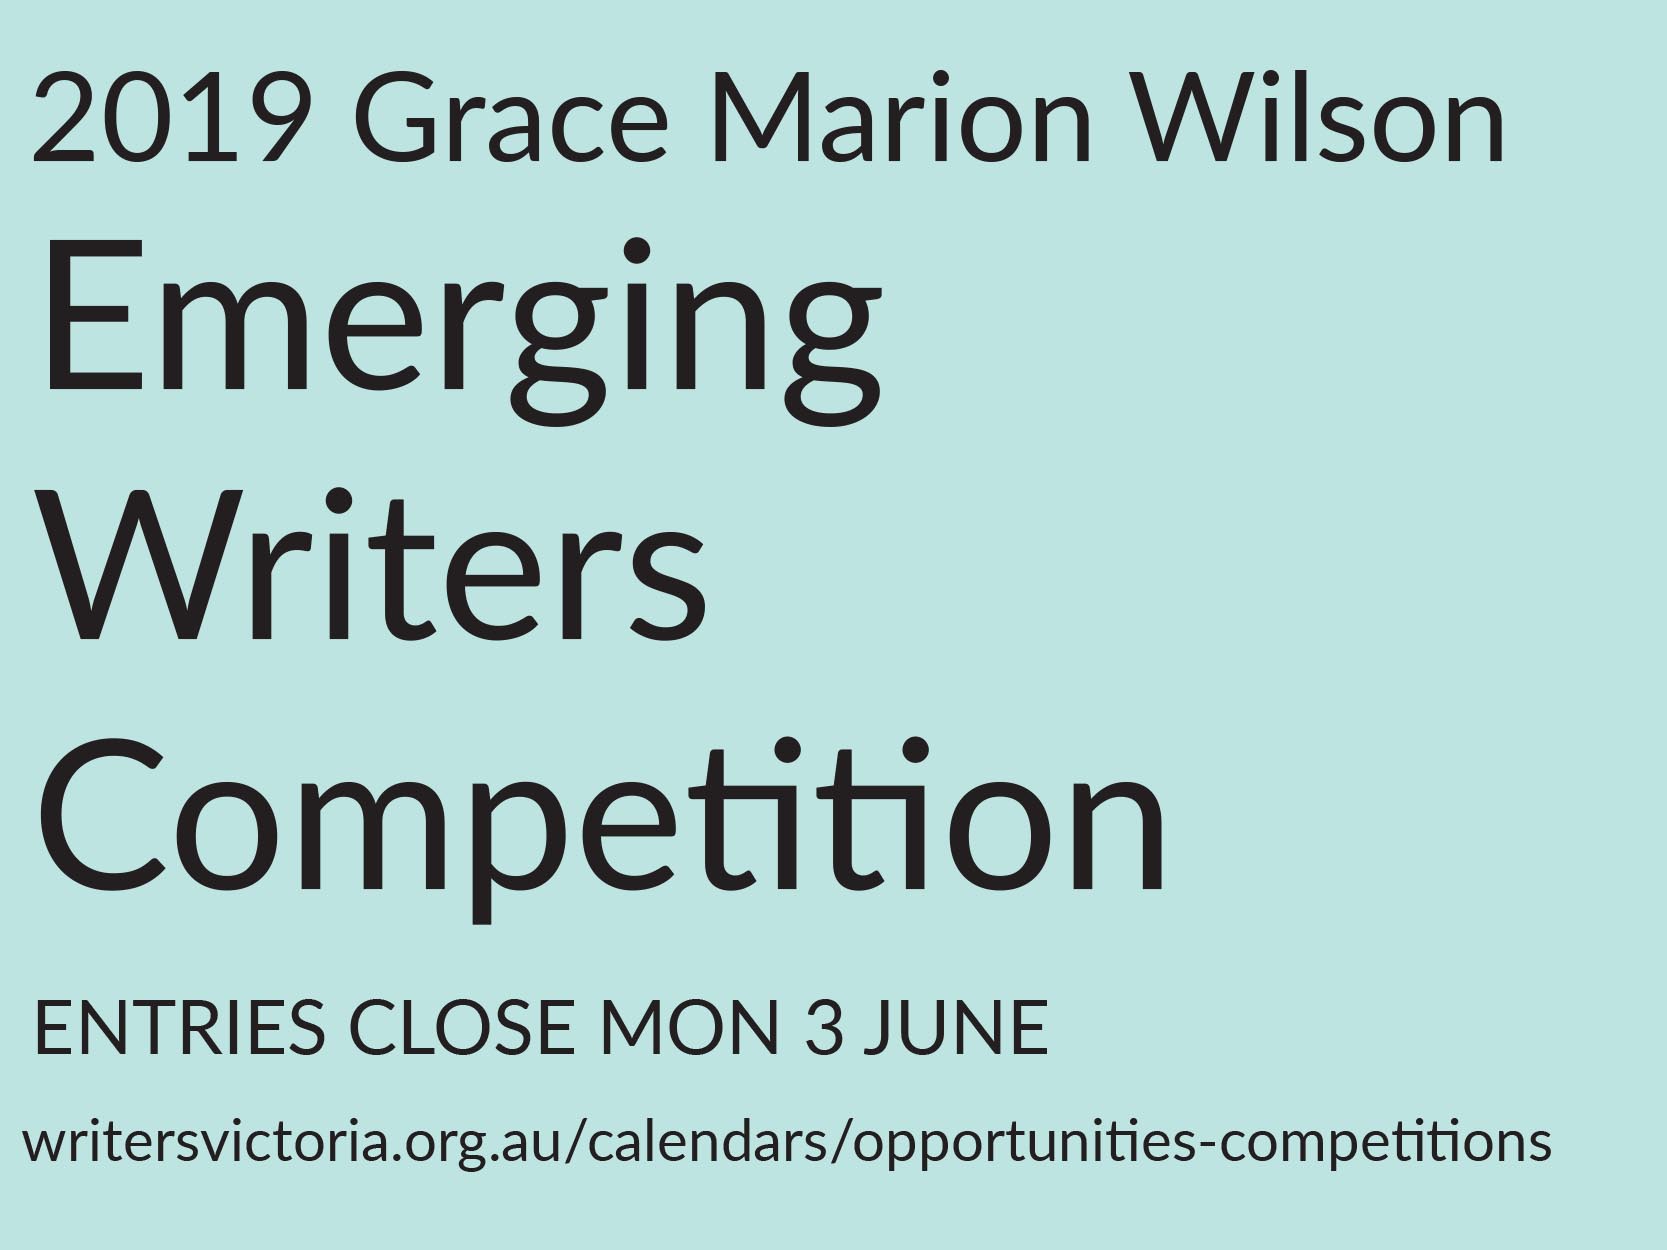 2019 GMW Emerging Writers Competition